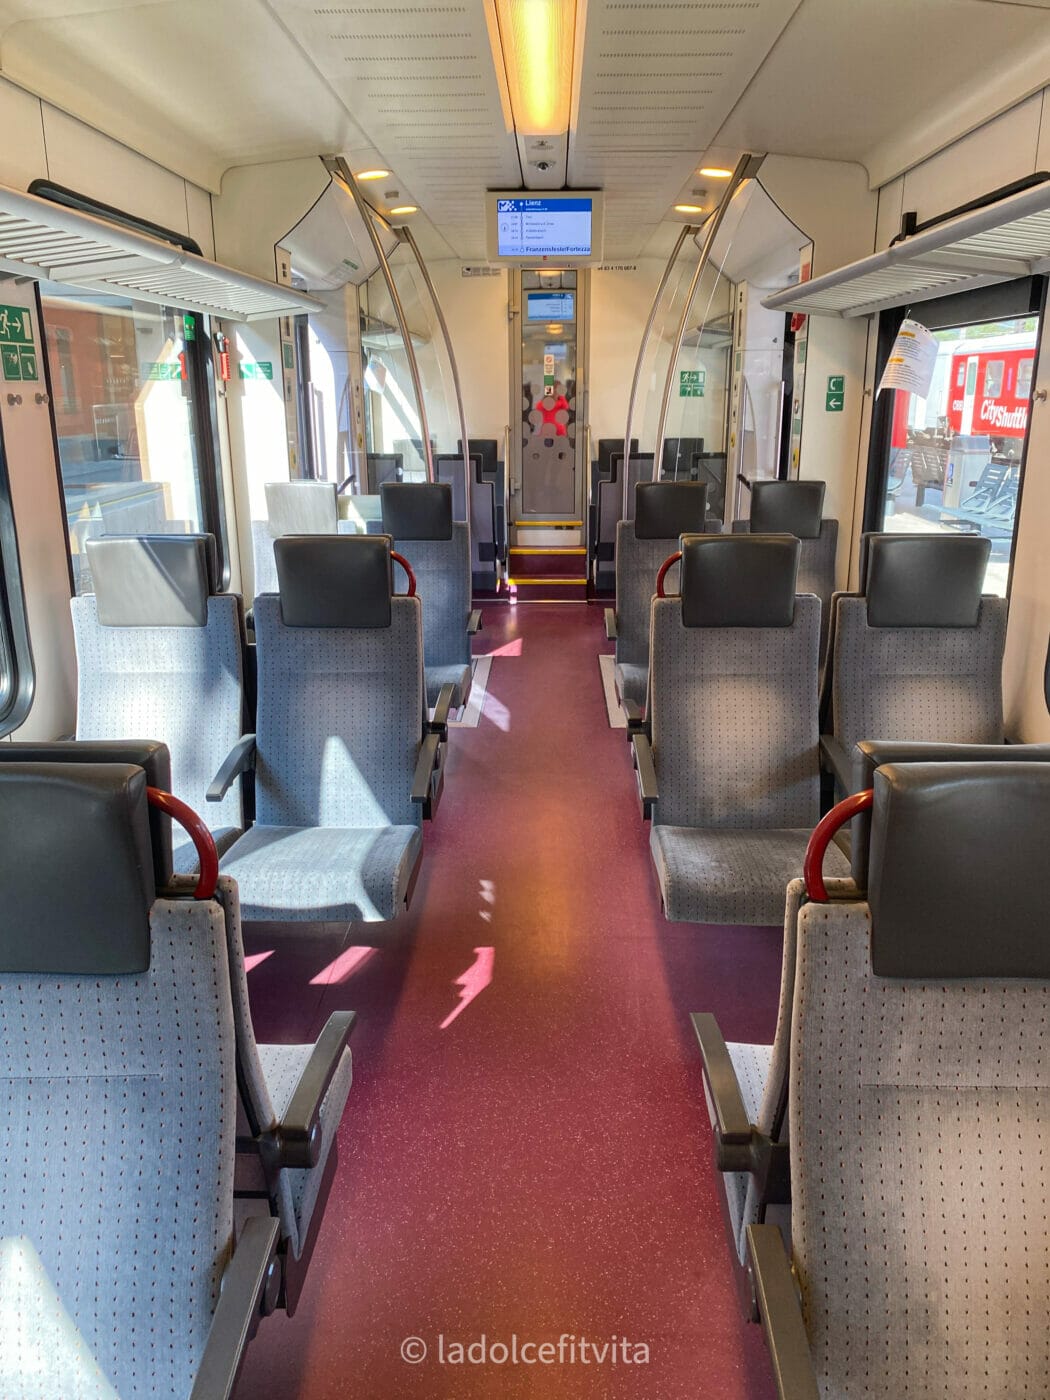 view of train seats and corridor on a regional train in austria